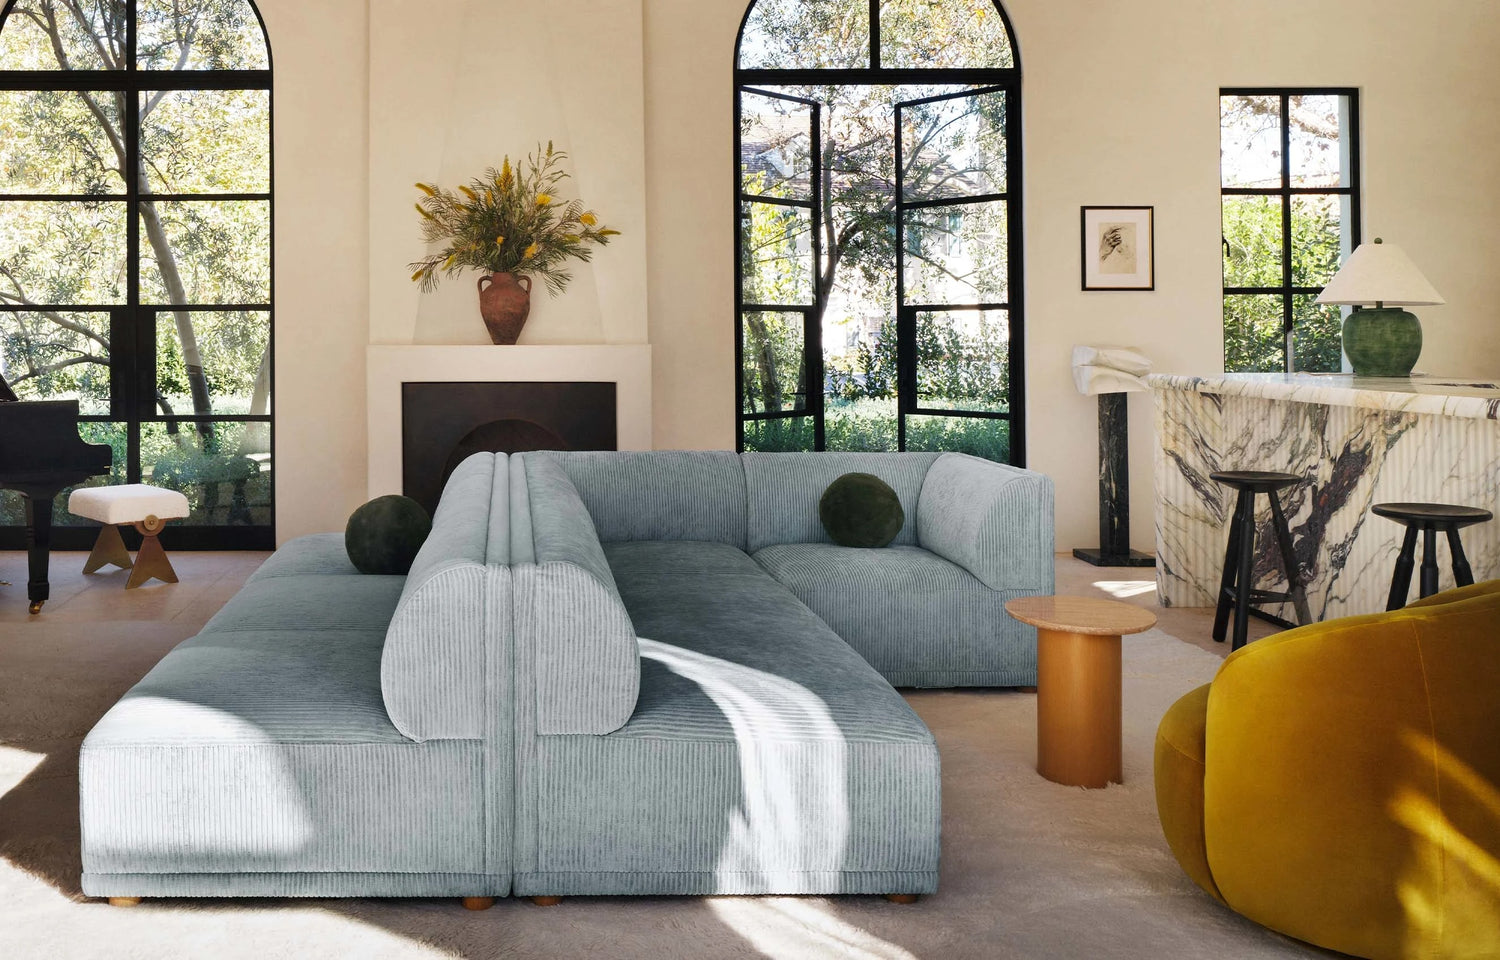 A modern living room featuring a light blue sectional sofa, a yellow armchair, a coffee table, and a marble-topped bar area with high stools. Large arched windows offer a view of lush greenery, and sunlight streams in, illuminating the space. A vase with flowers is on the mantel.